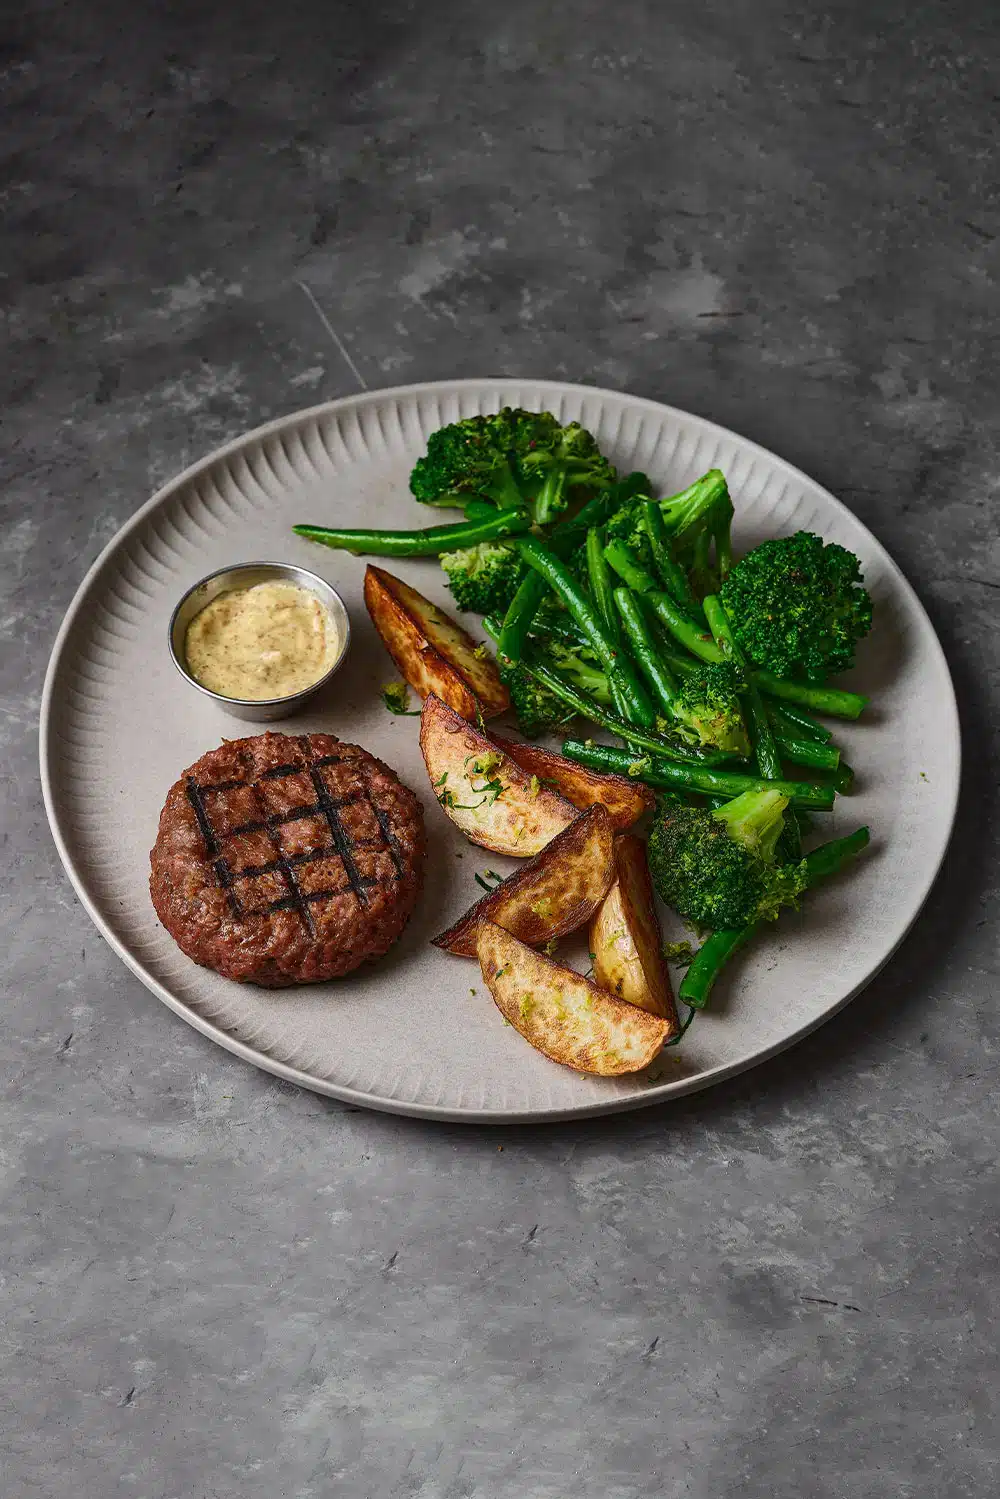 Redefine Burgers with Broccoli, Green Beans, Potatoes and Aioli